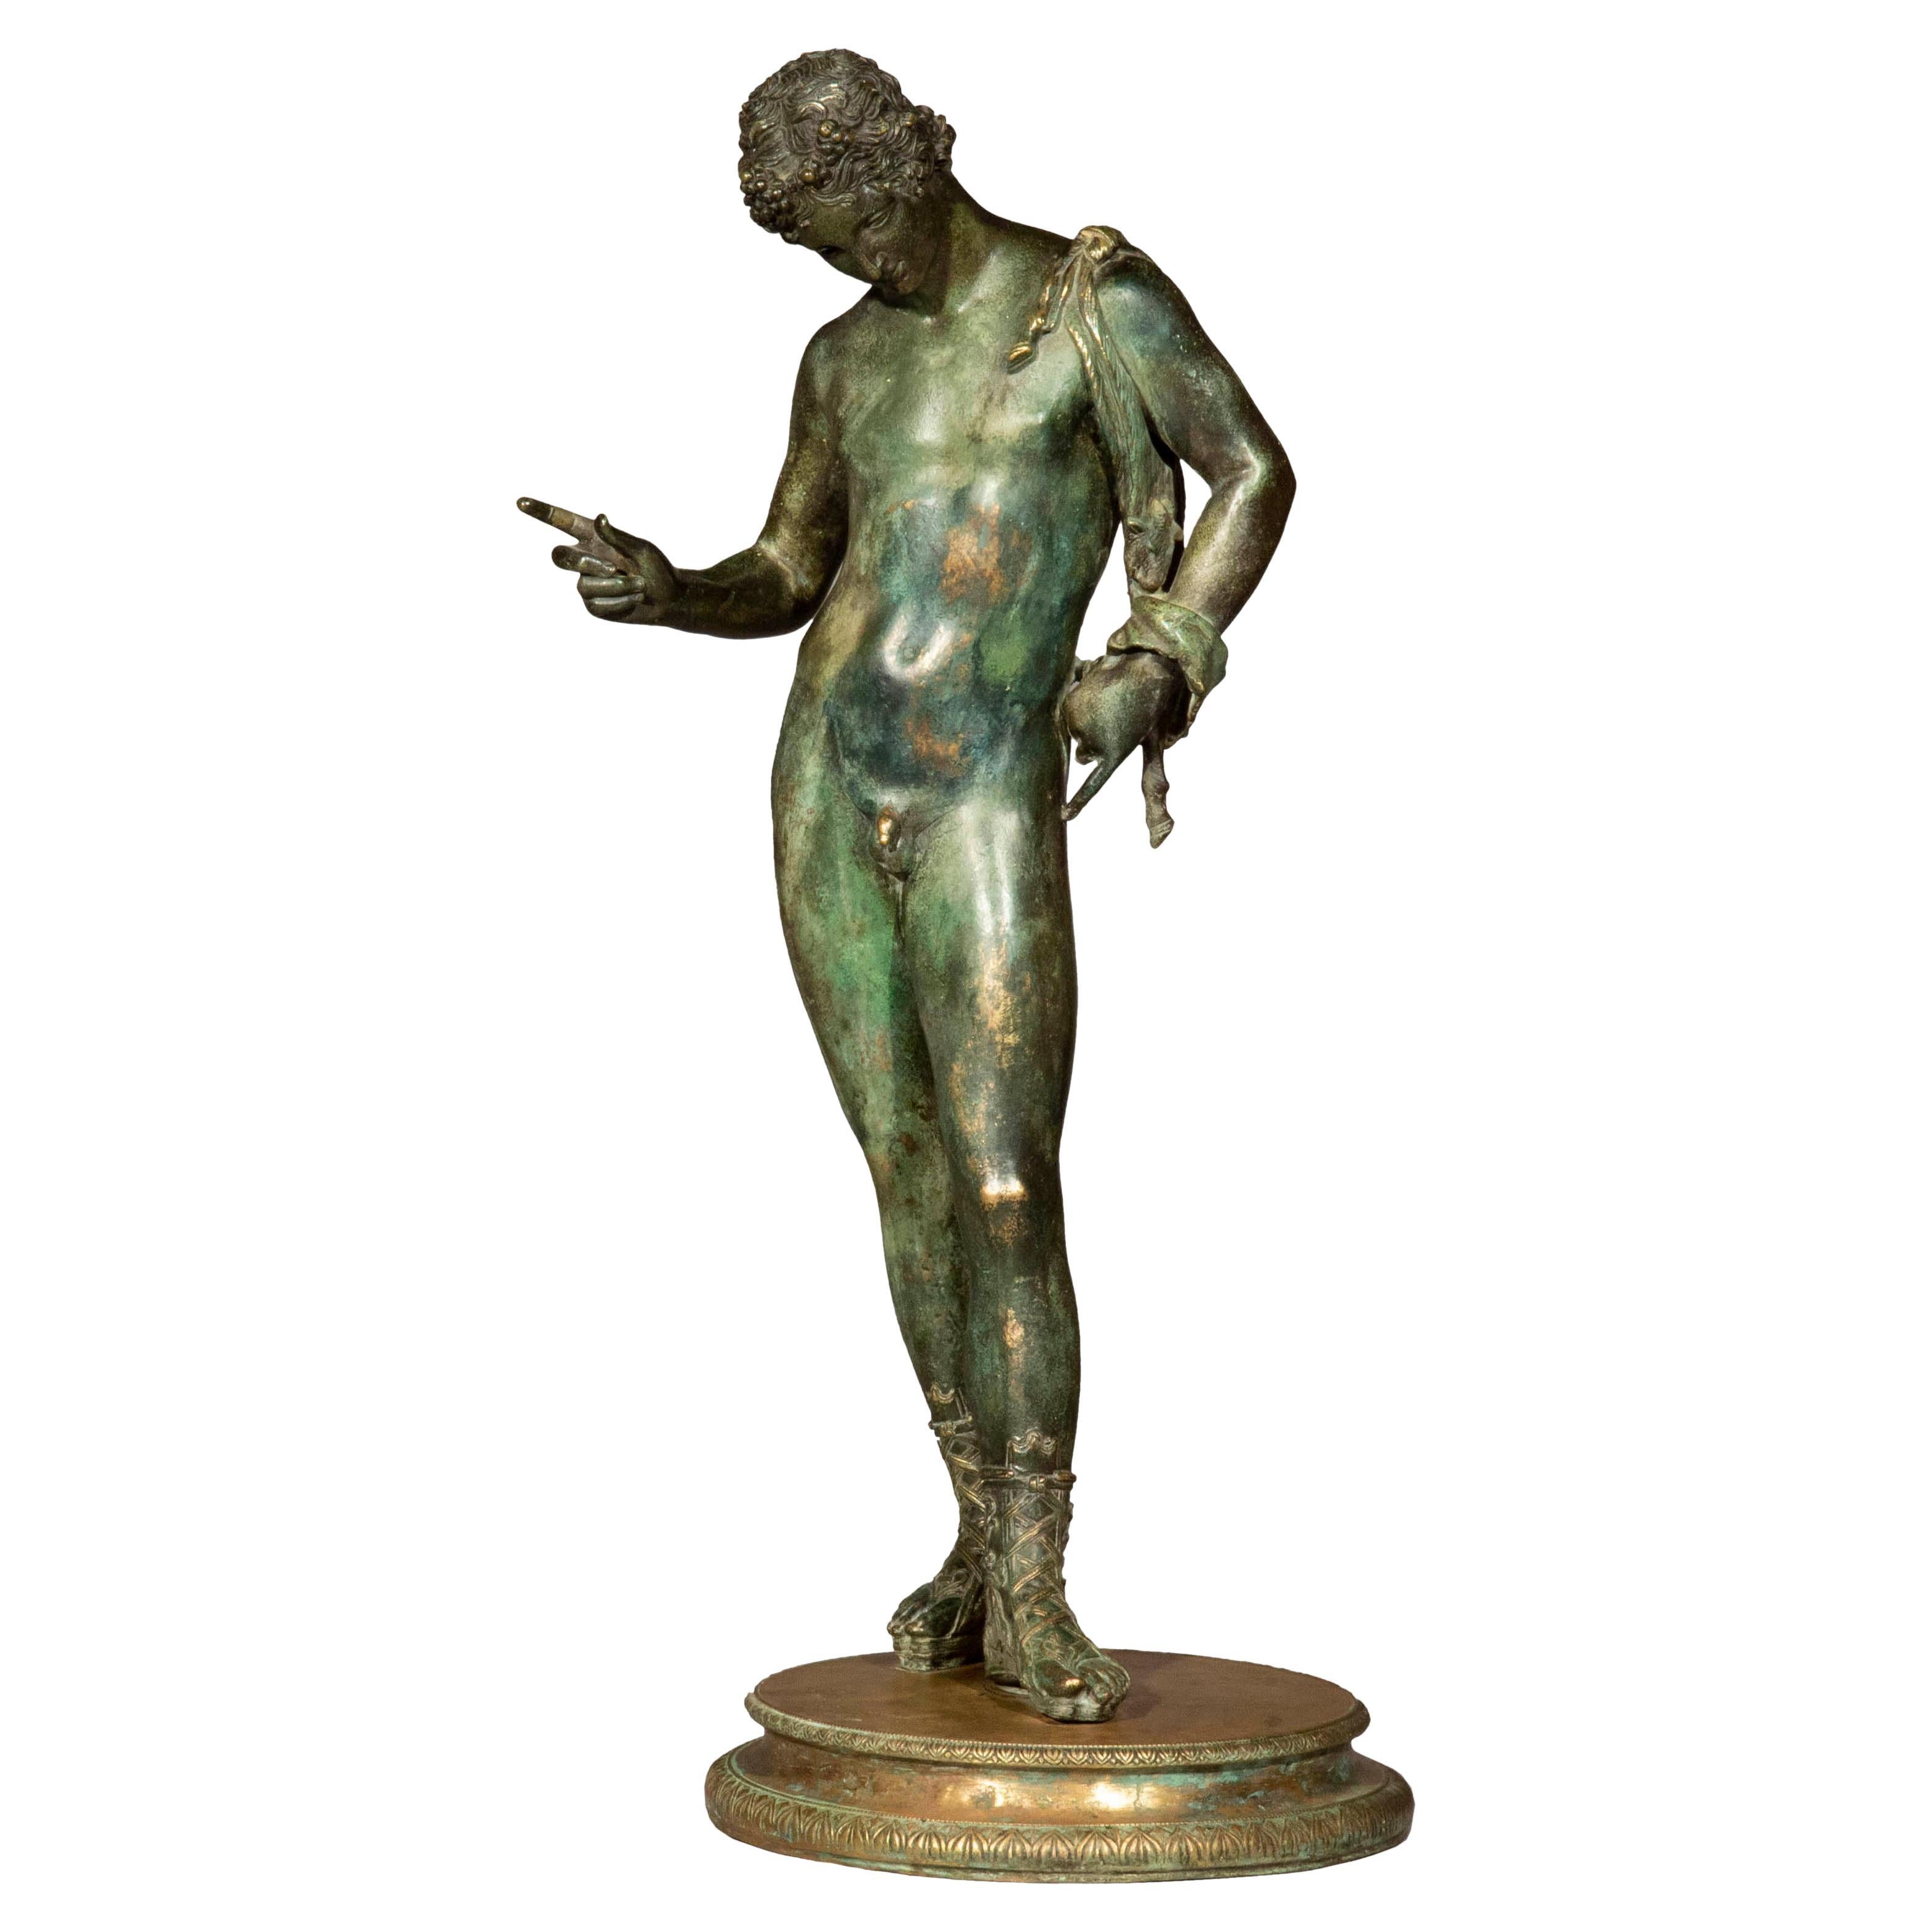 19th Century Grand Tour Bronze Figure of a Young Man as Dionysos or Narcissus